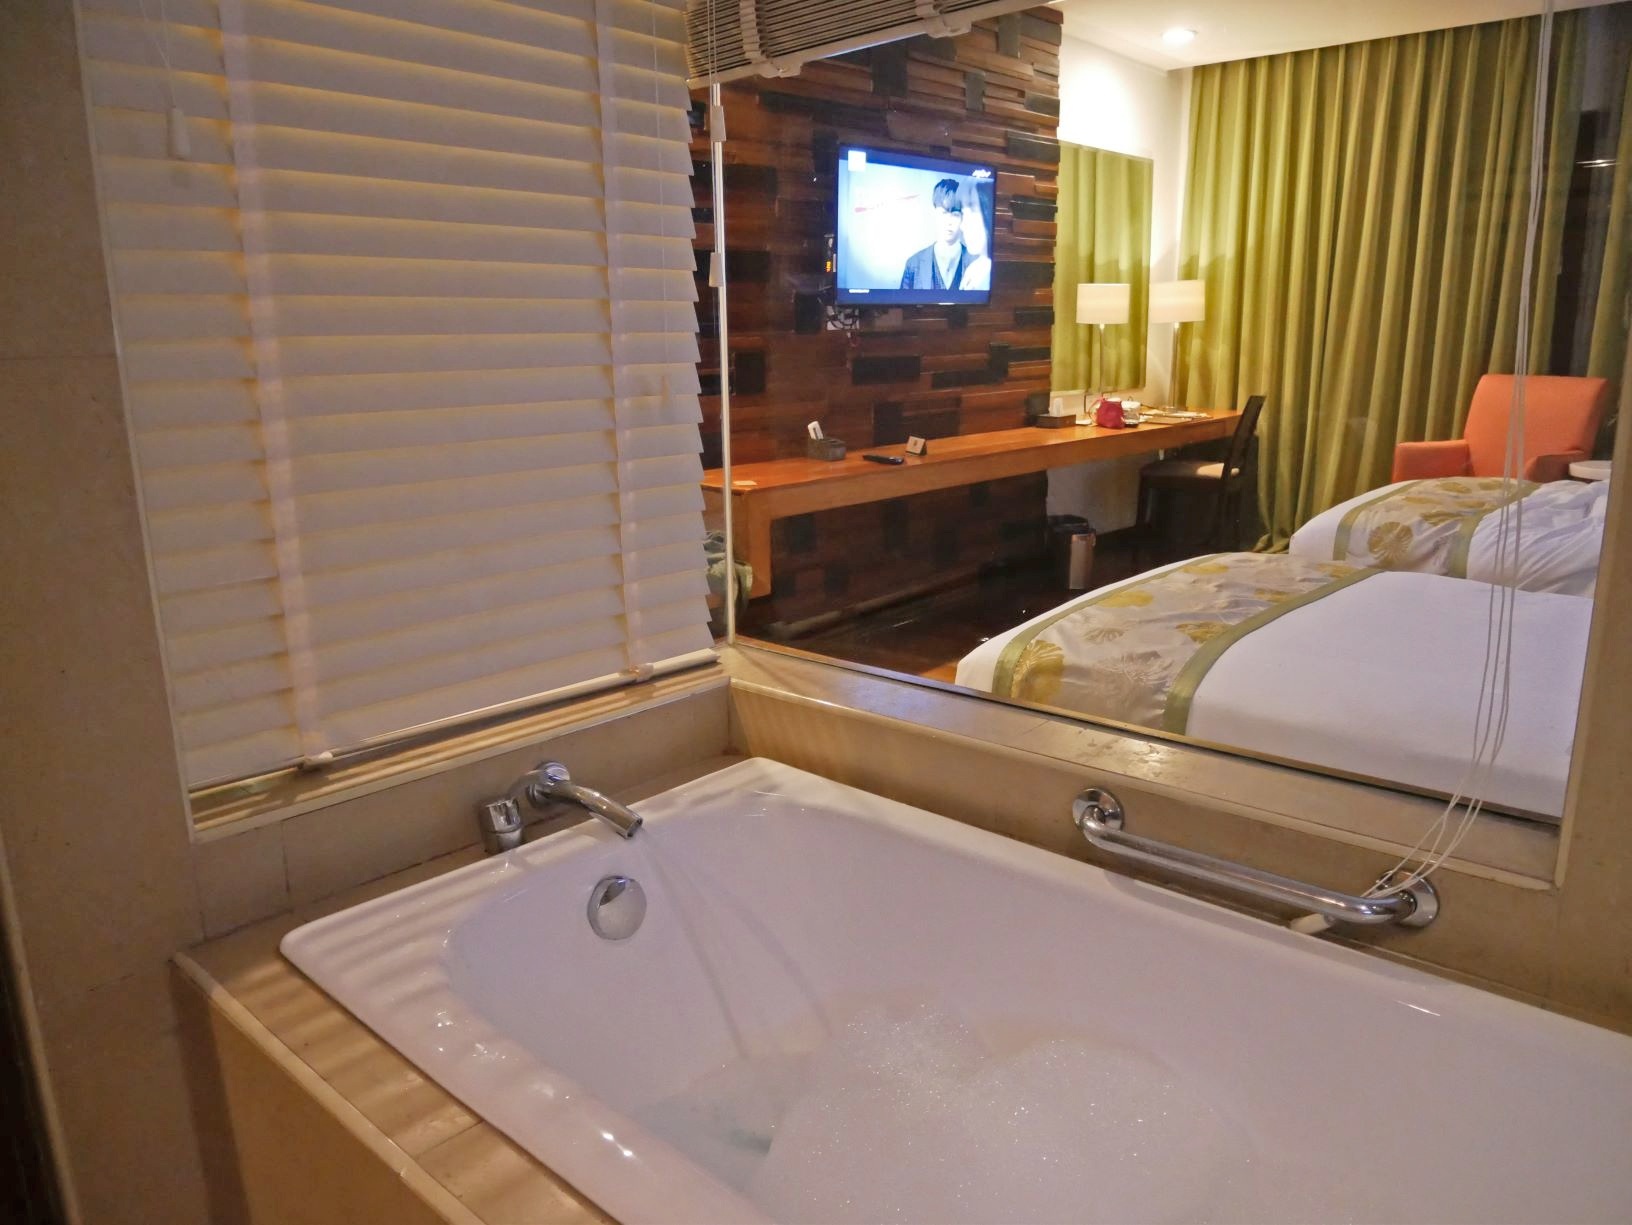 View of the bedroom from the tub. Photo: Rachel Malaguit